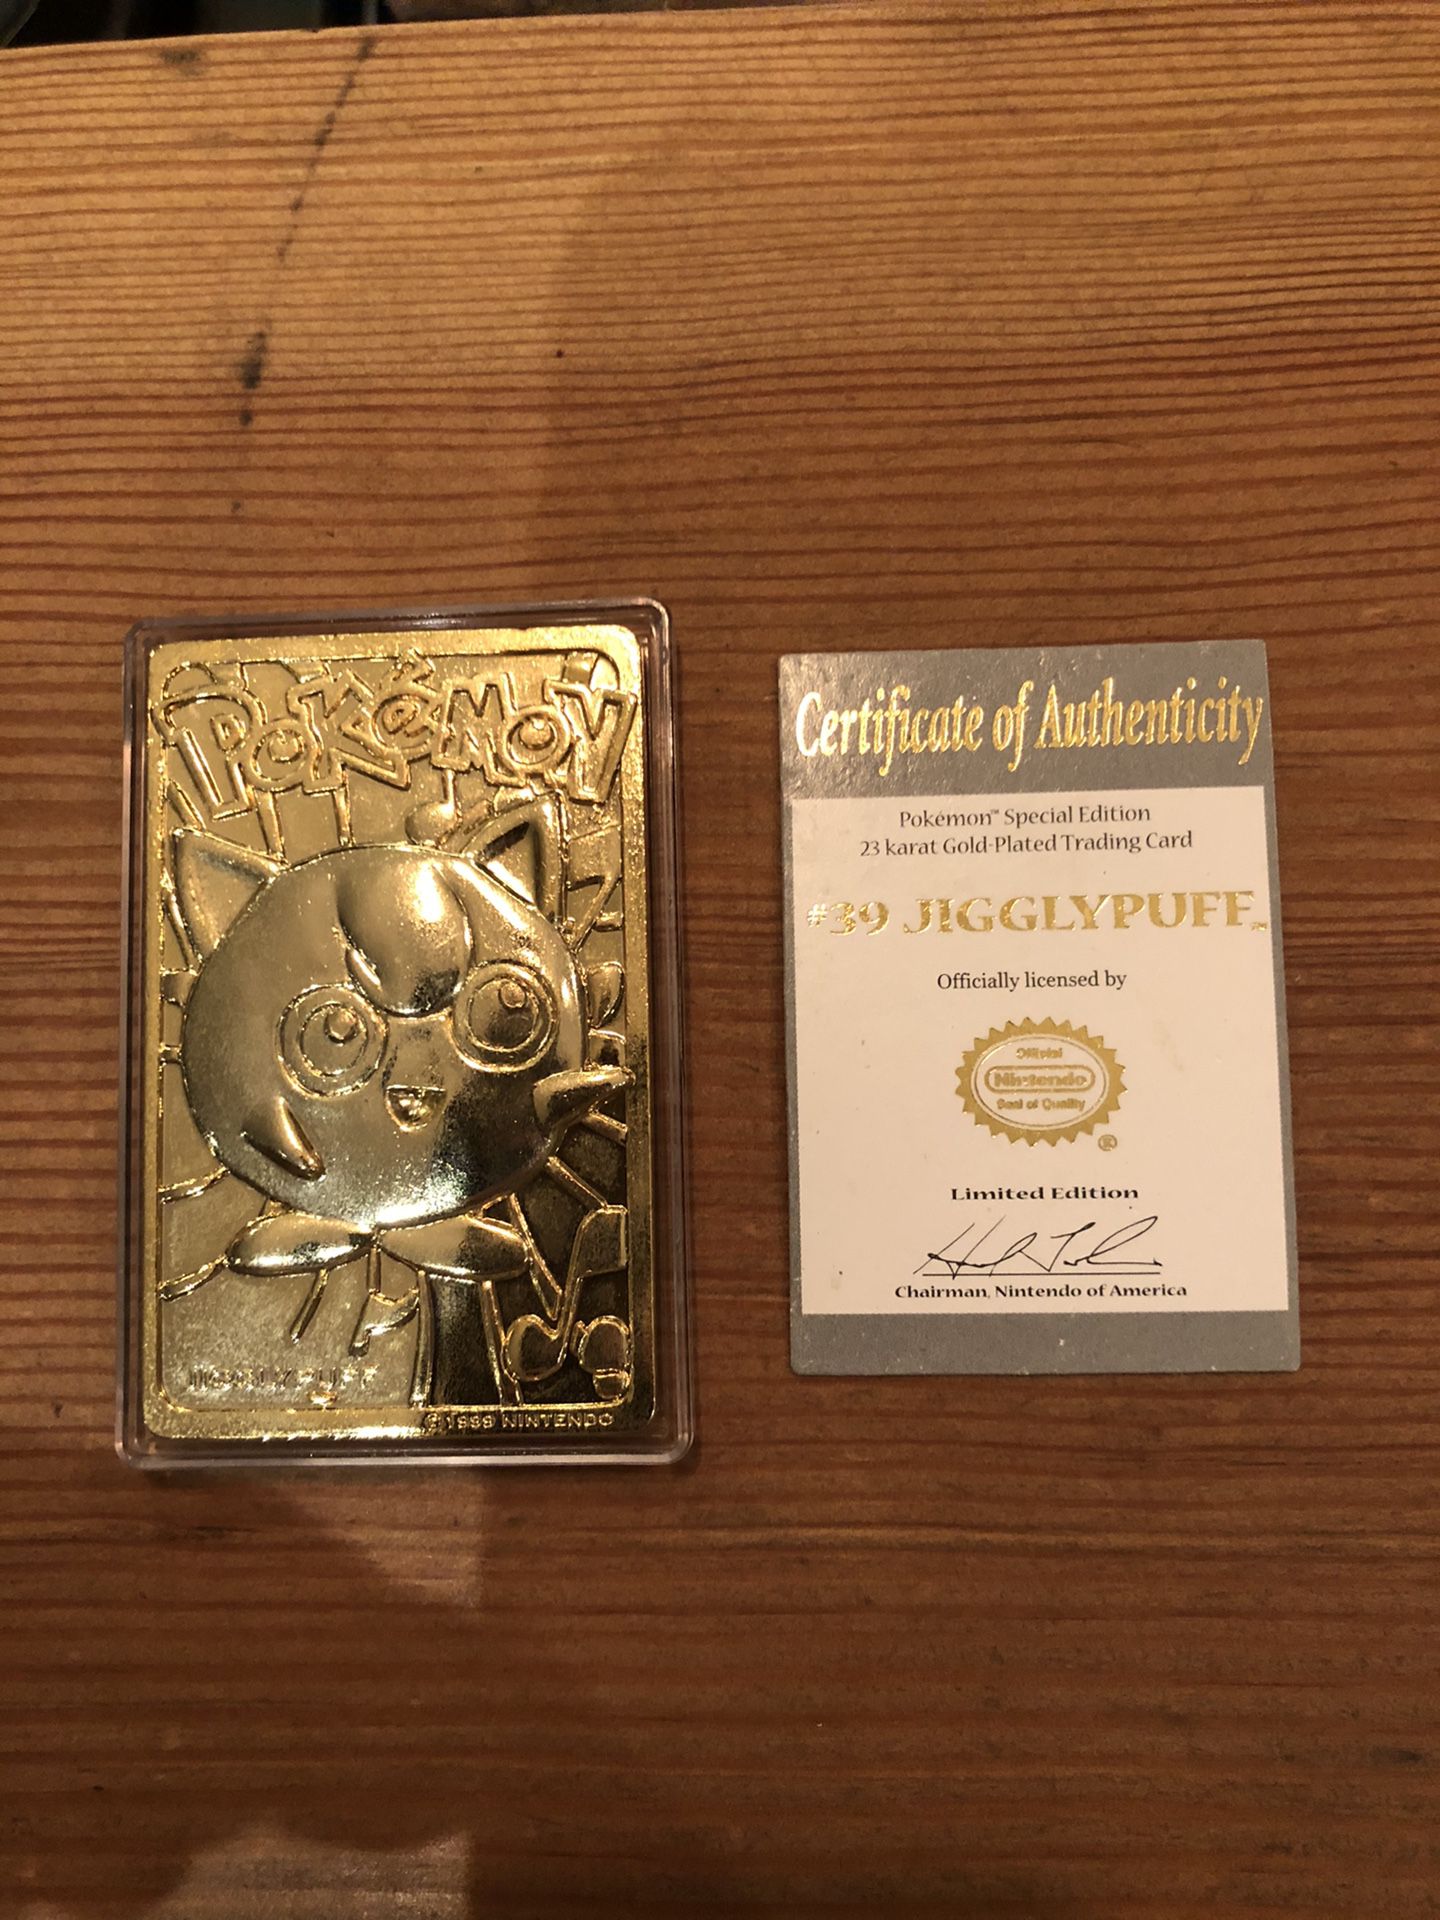 Pokemon special edition 23 karat gold plated trading card